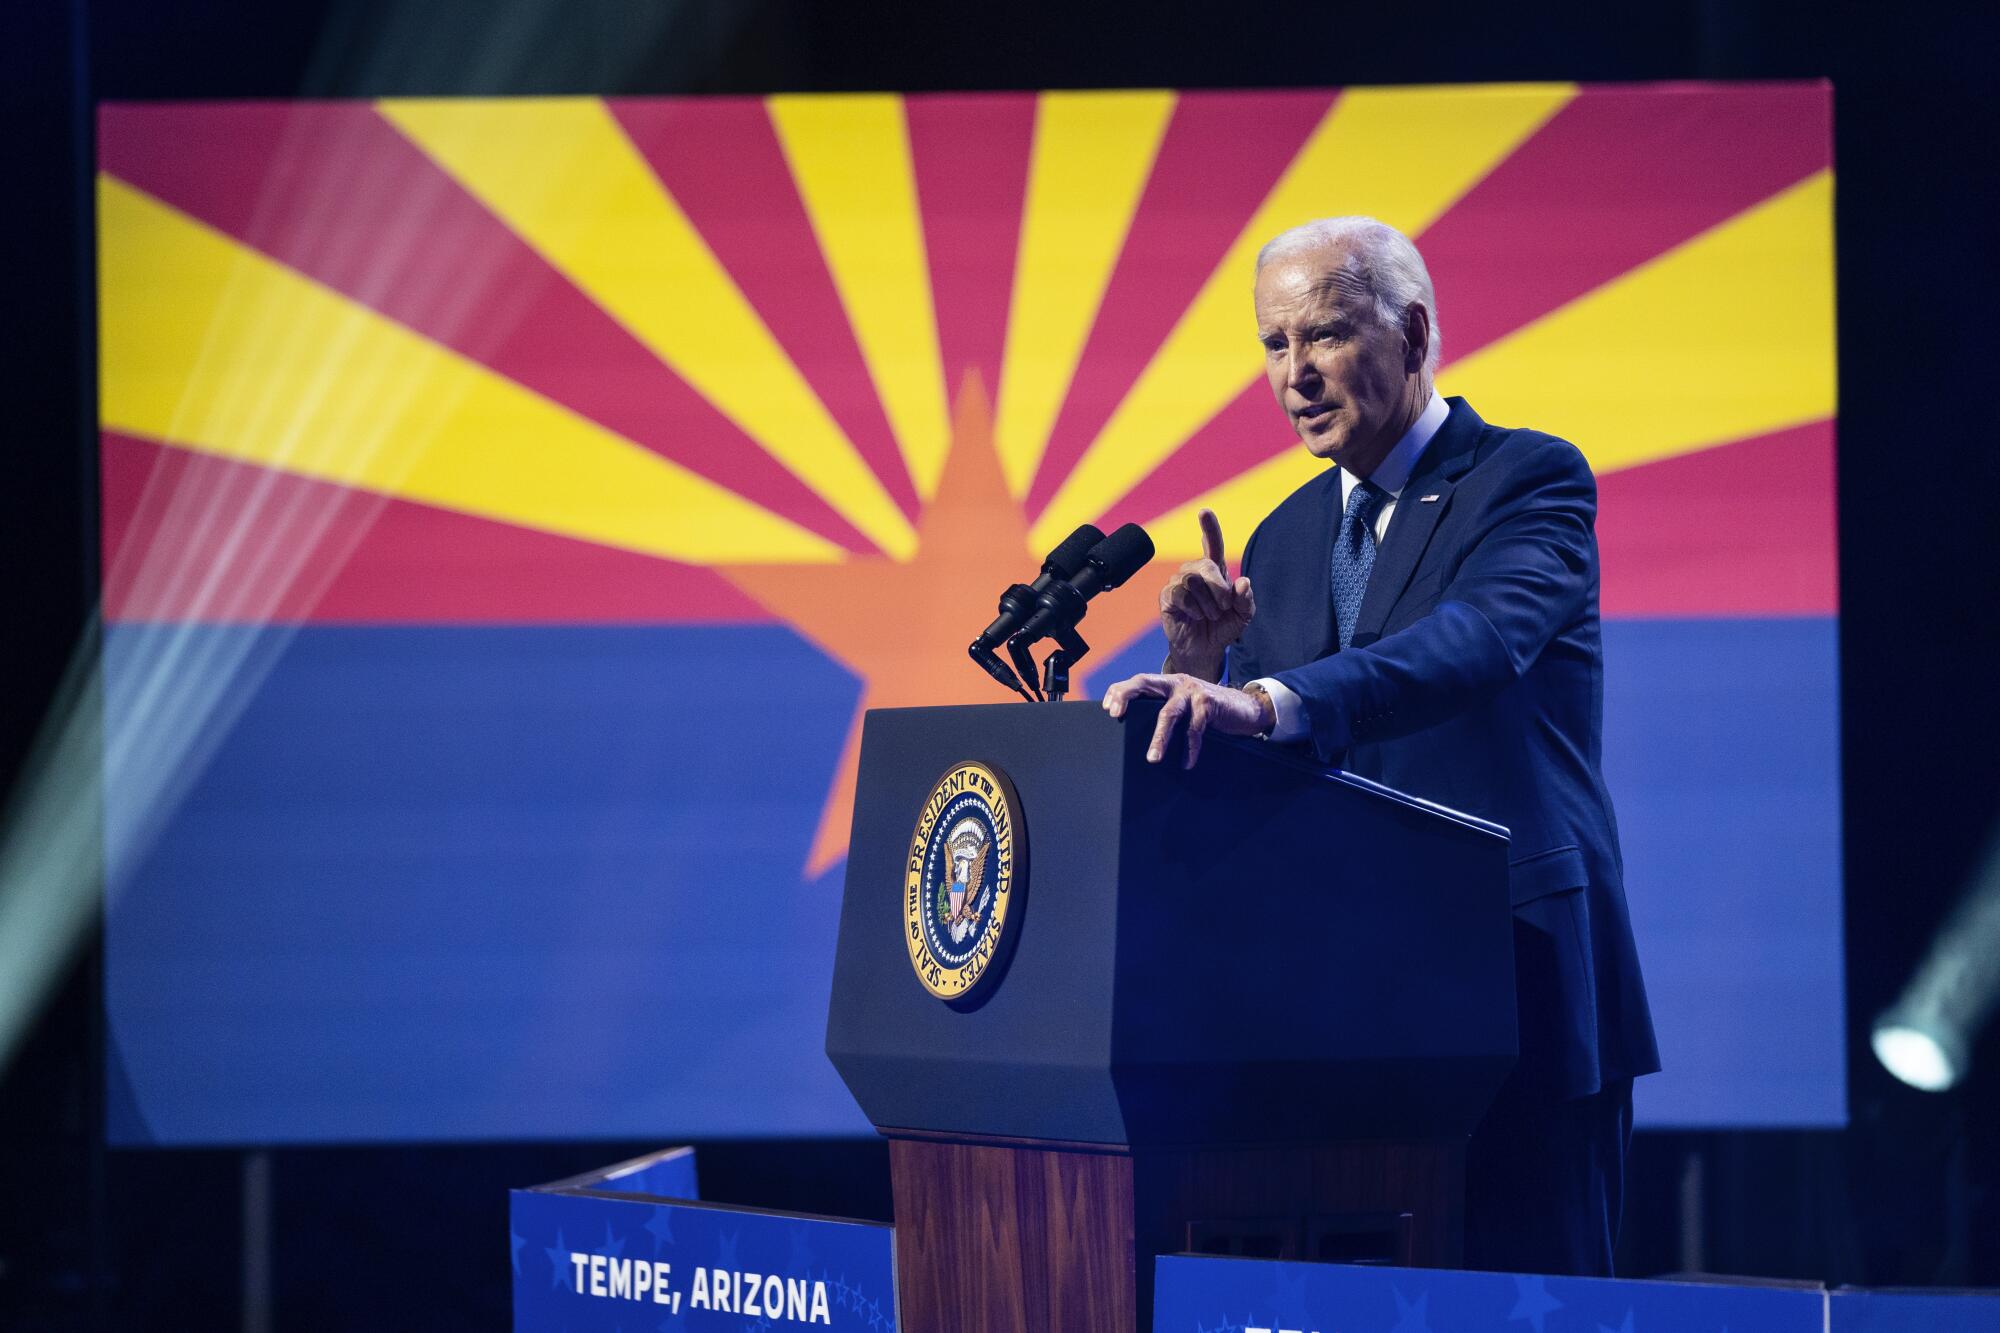 President Biden speaking at a lectern with a presidential seal as Arizona's flag is displayed on a large screen